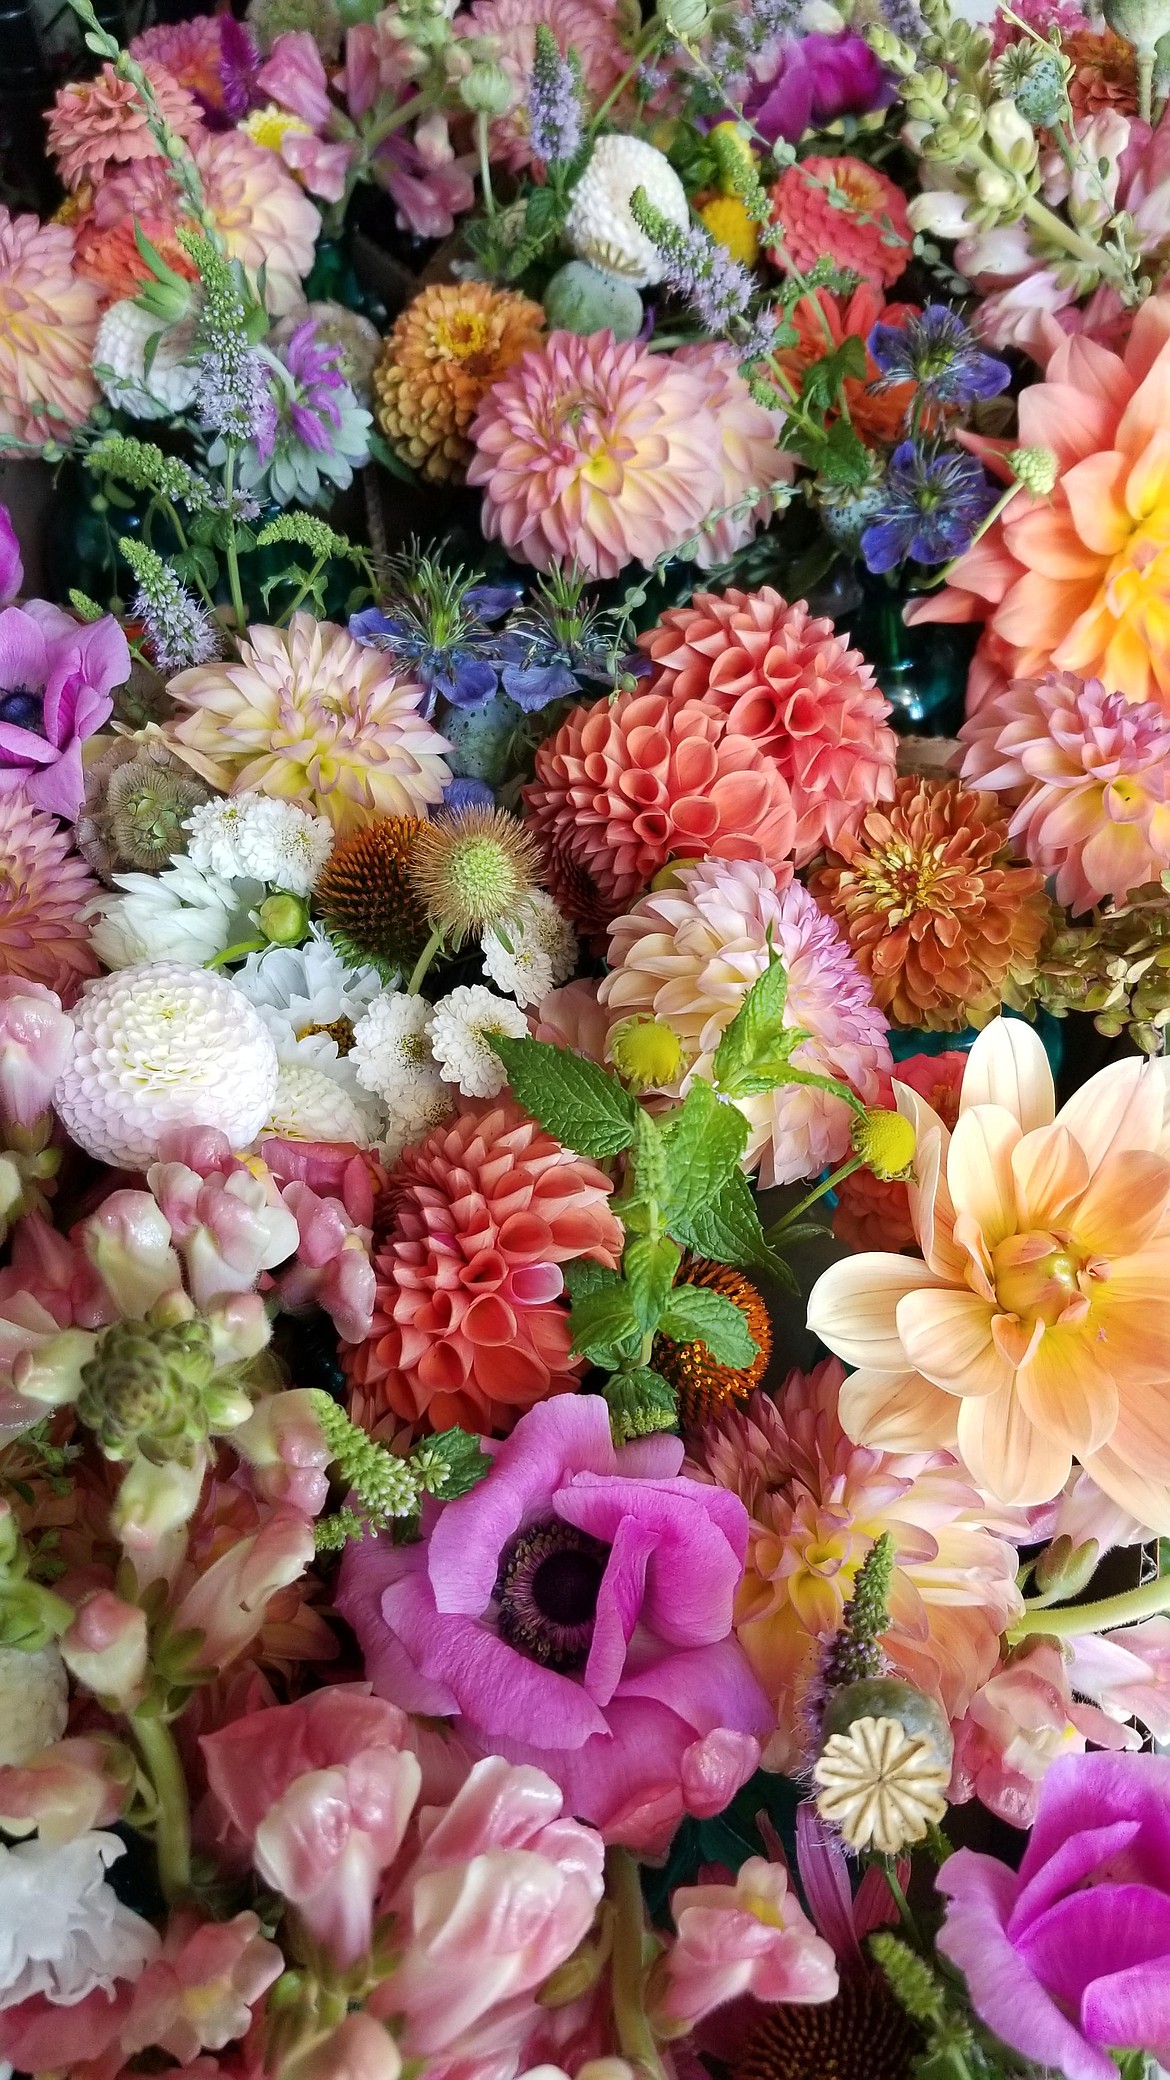 April Vomfell creates flower arrangements for weddings using blooms picked by hand at Flathead Farmworks in Kalispell. (Courtesy of April Vomfell)